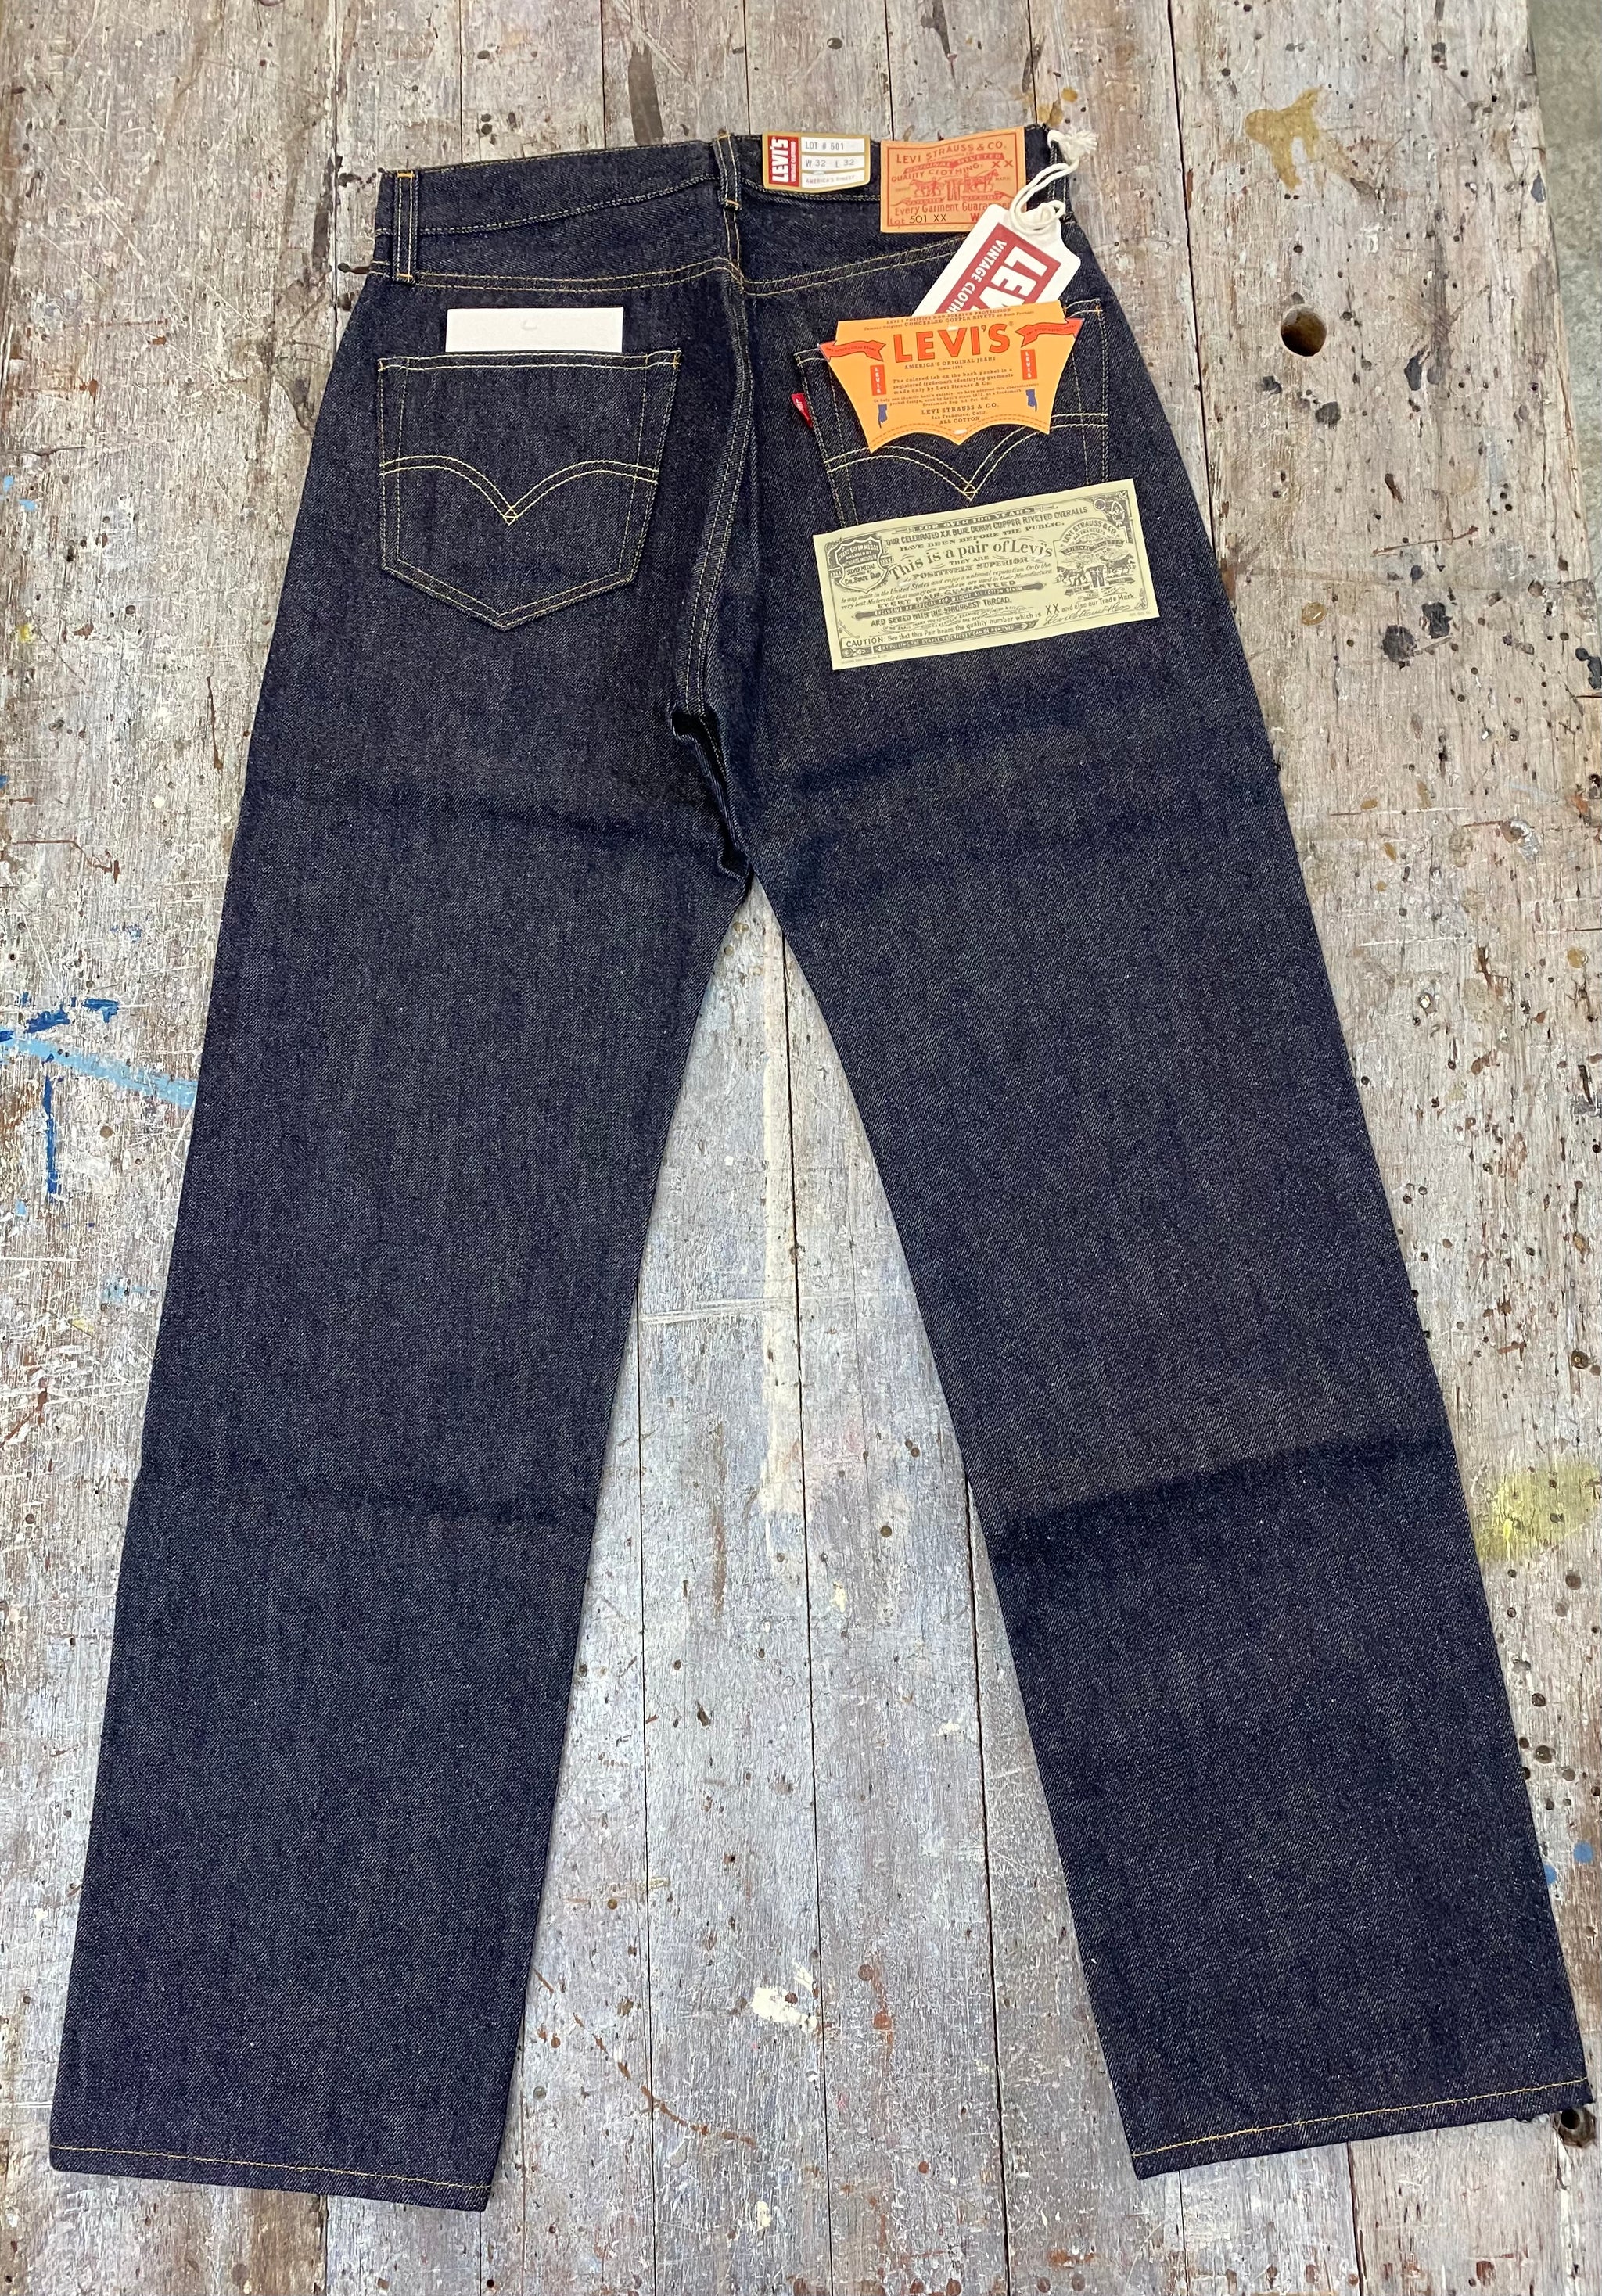 LEVIS VINTAGE CLOTHING 1955 501XX RAW SHRINK TO FIT - Elroy Clothing